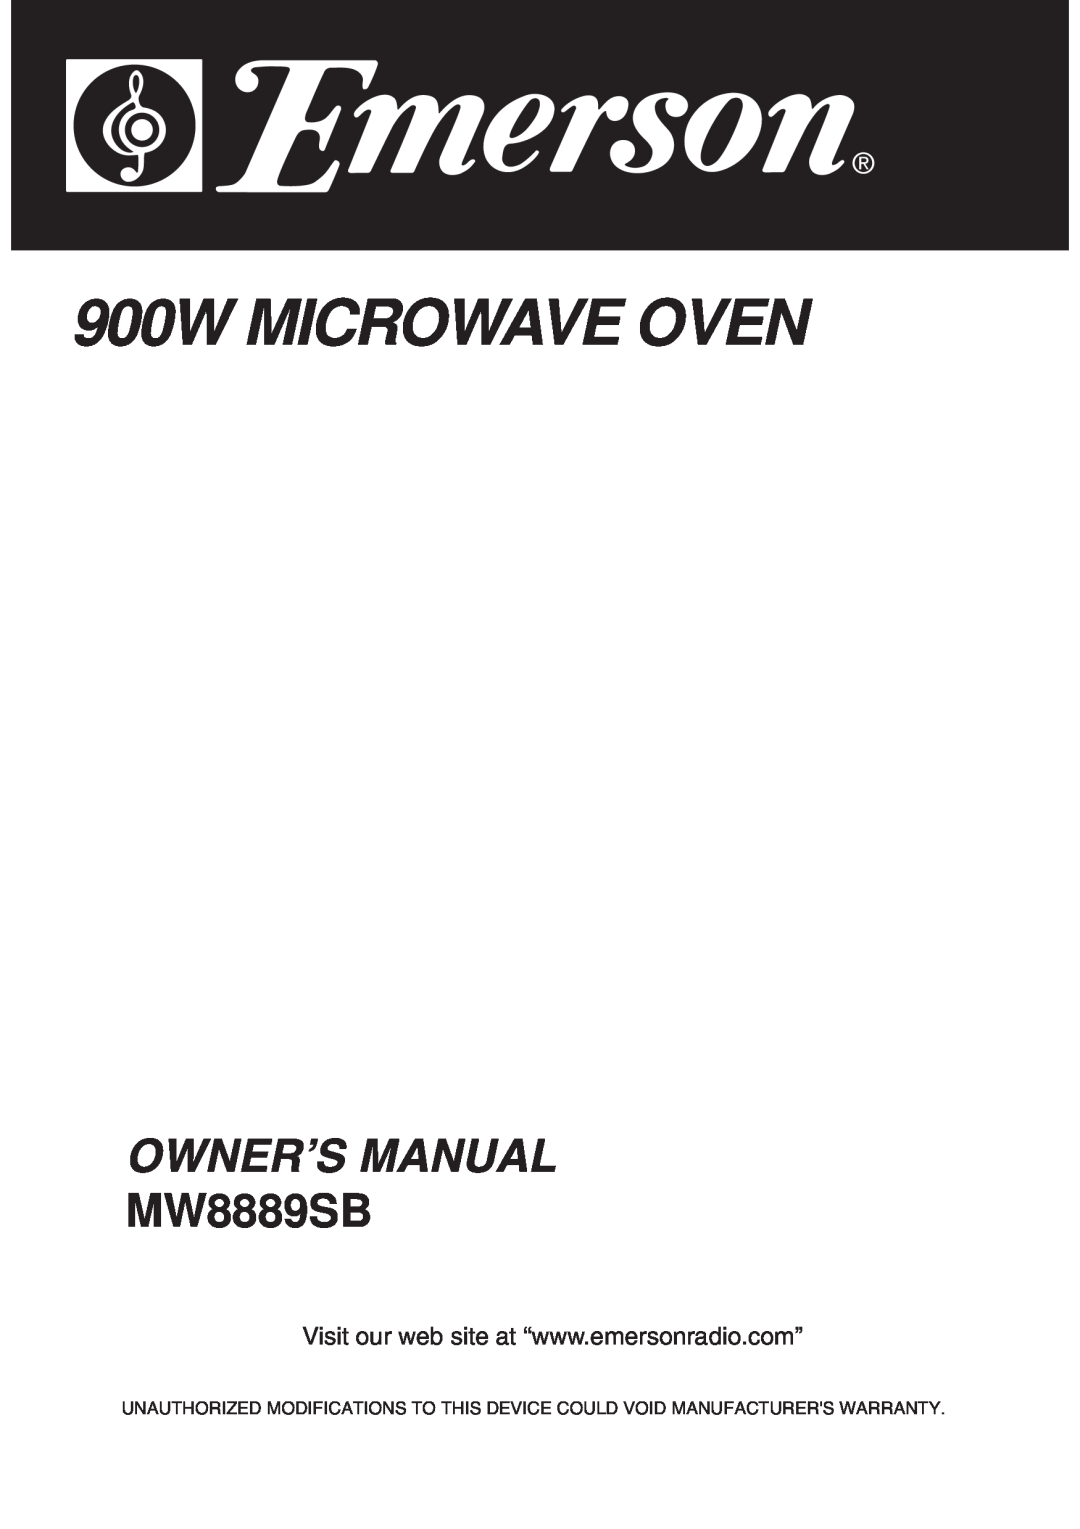 Emerson MV1094F owner manual 900W MICROWAVE OVEN, Owner’S Manual, MW8889SB 